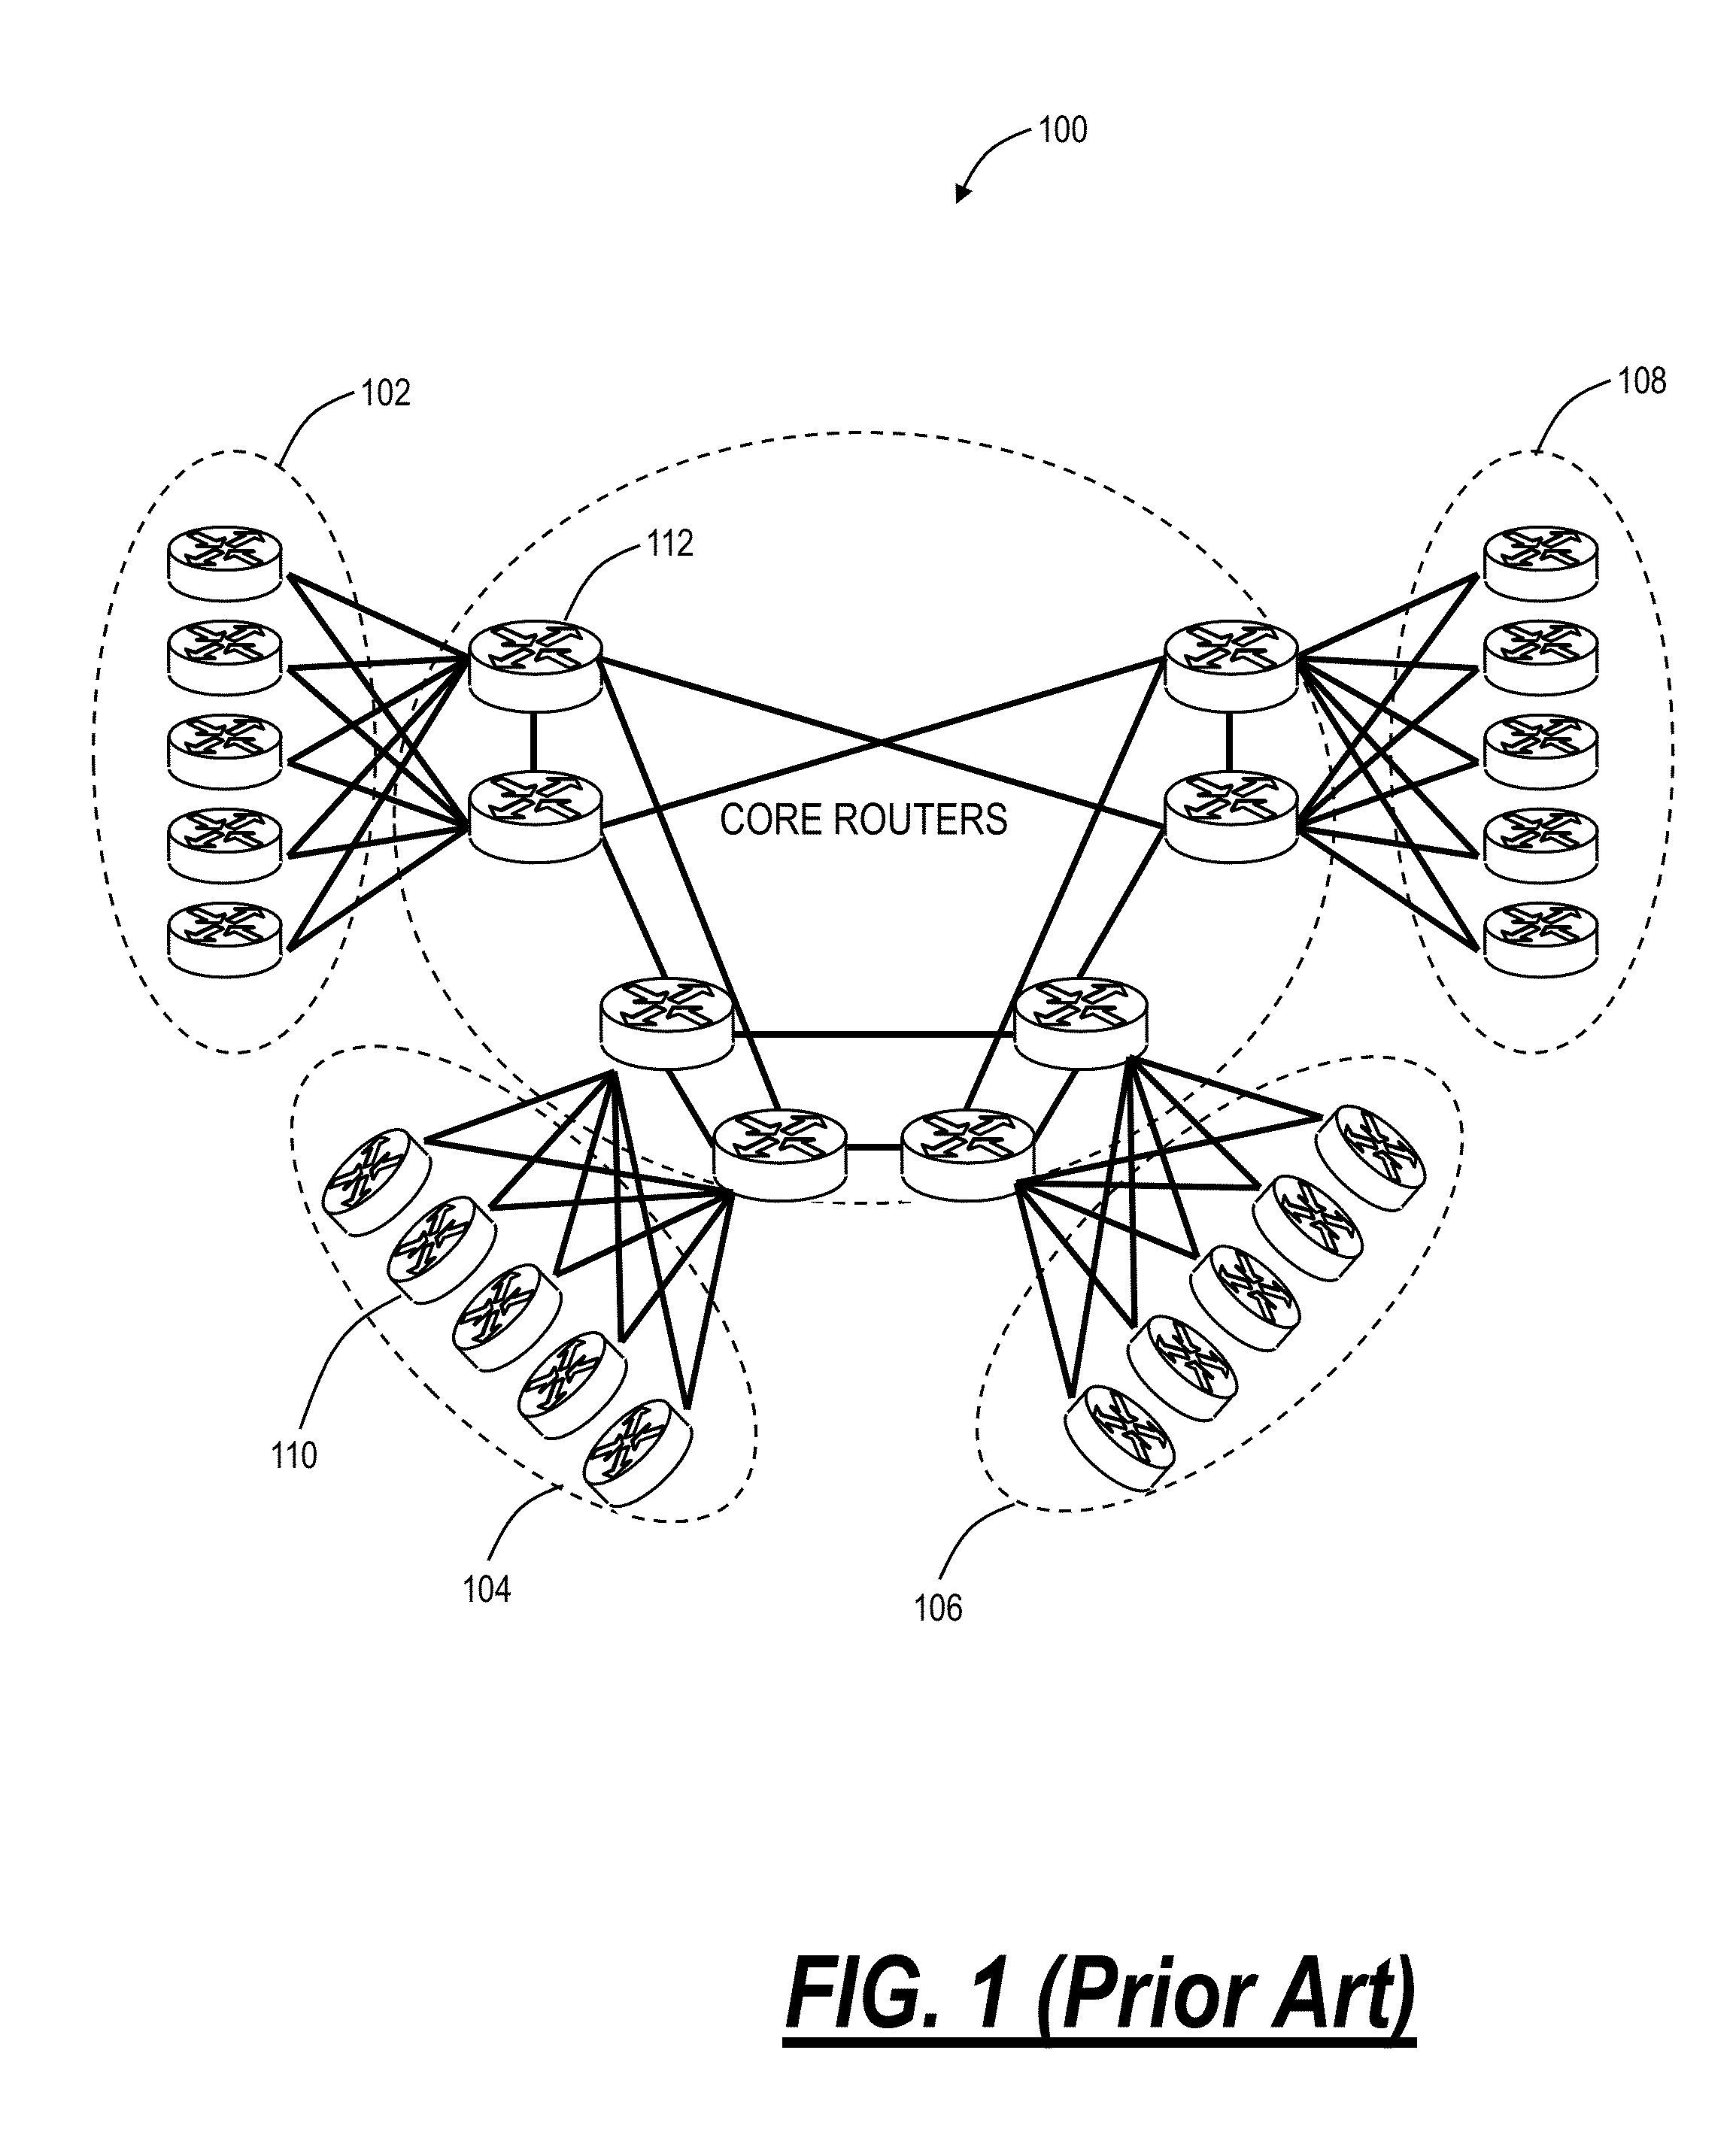 Virtual core router and switch systems and methods with a hybrid control architecture